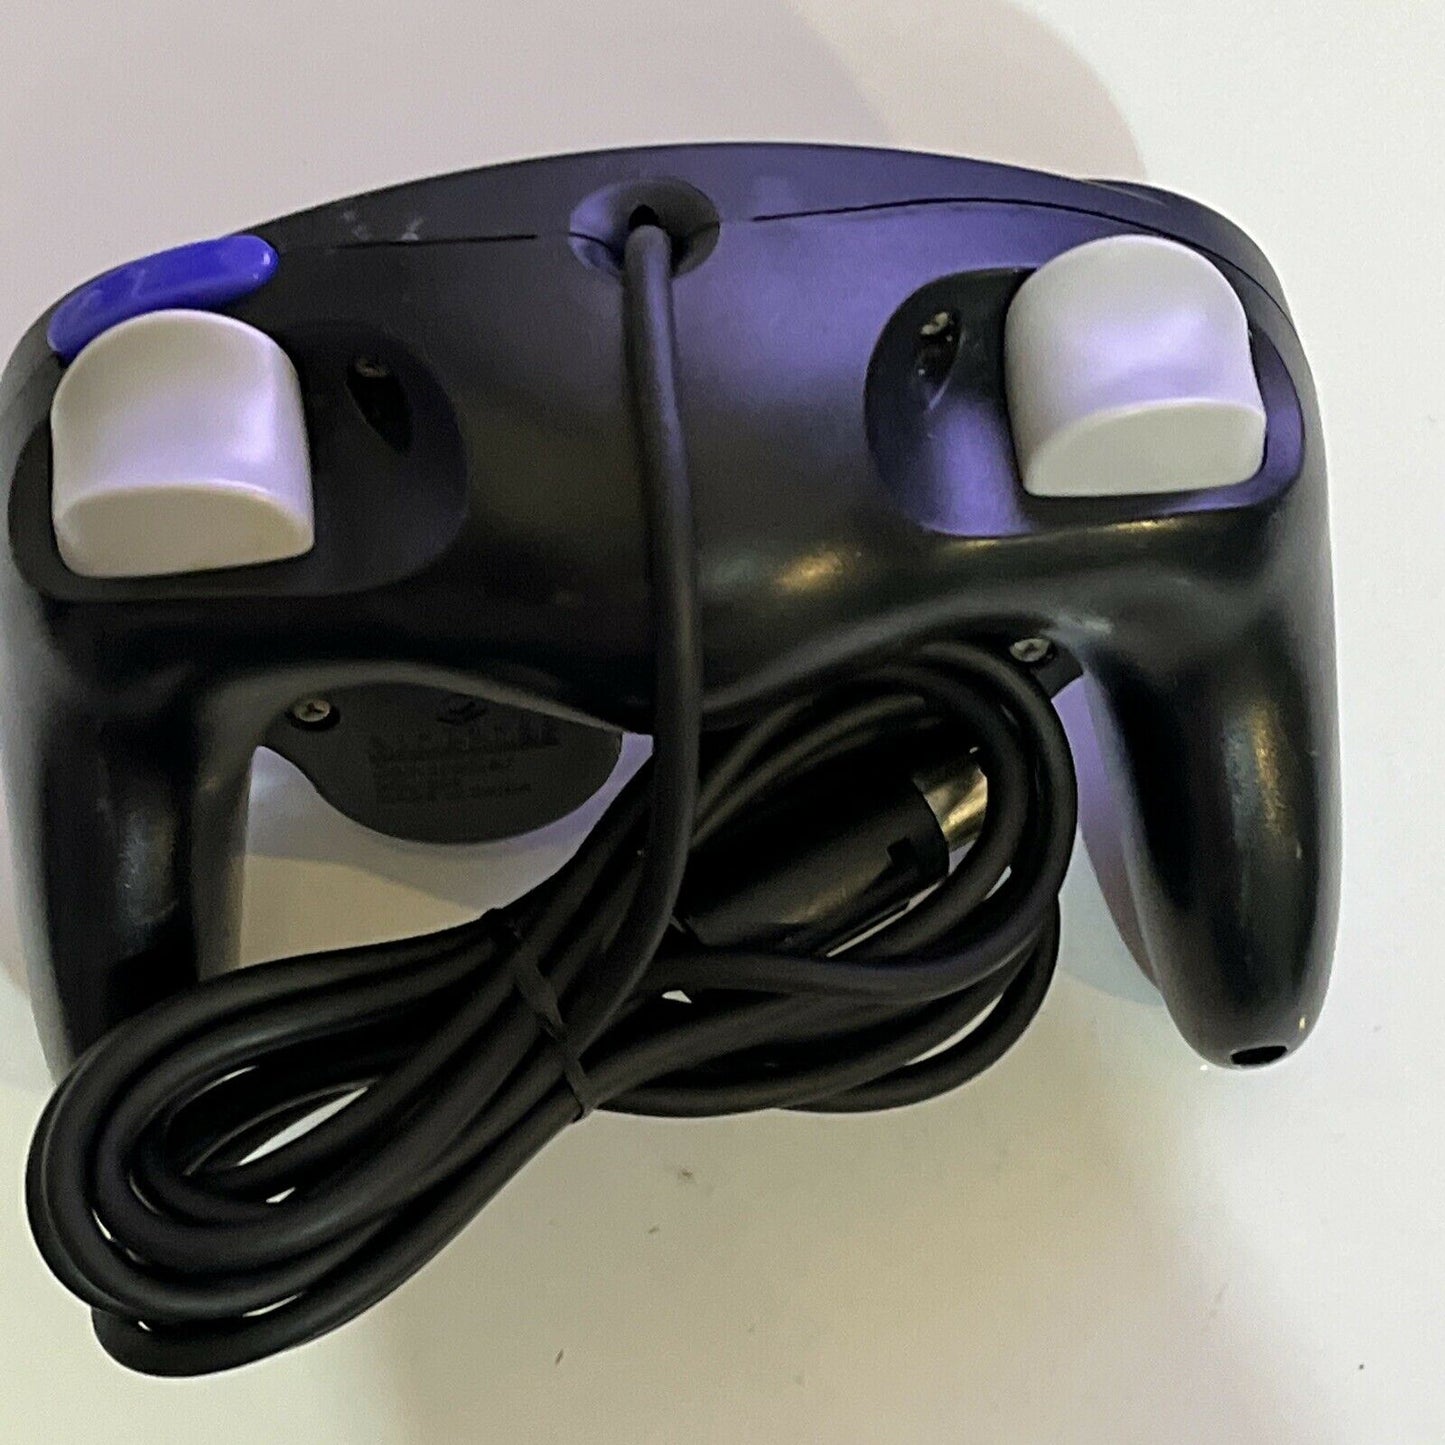 Genuine NINTENDO GameCube Controller - Official Nintendo Tested and working!